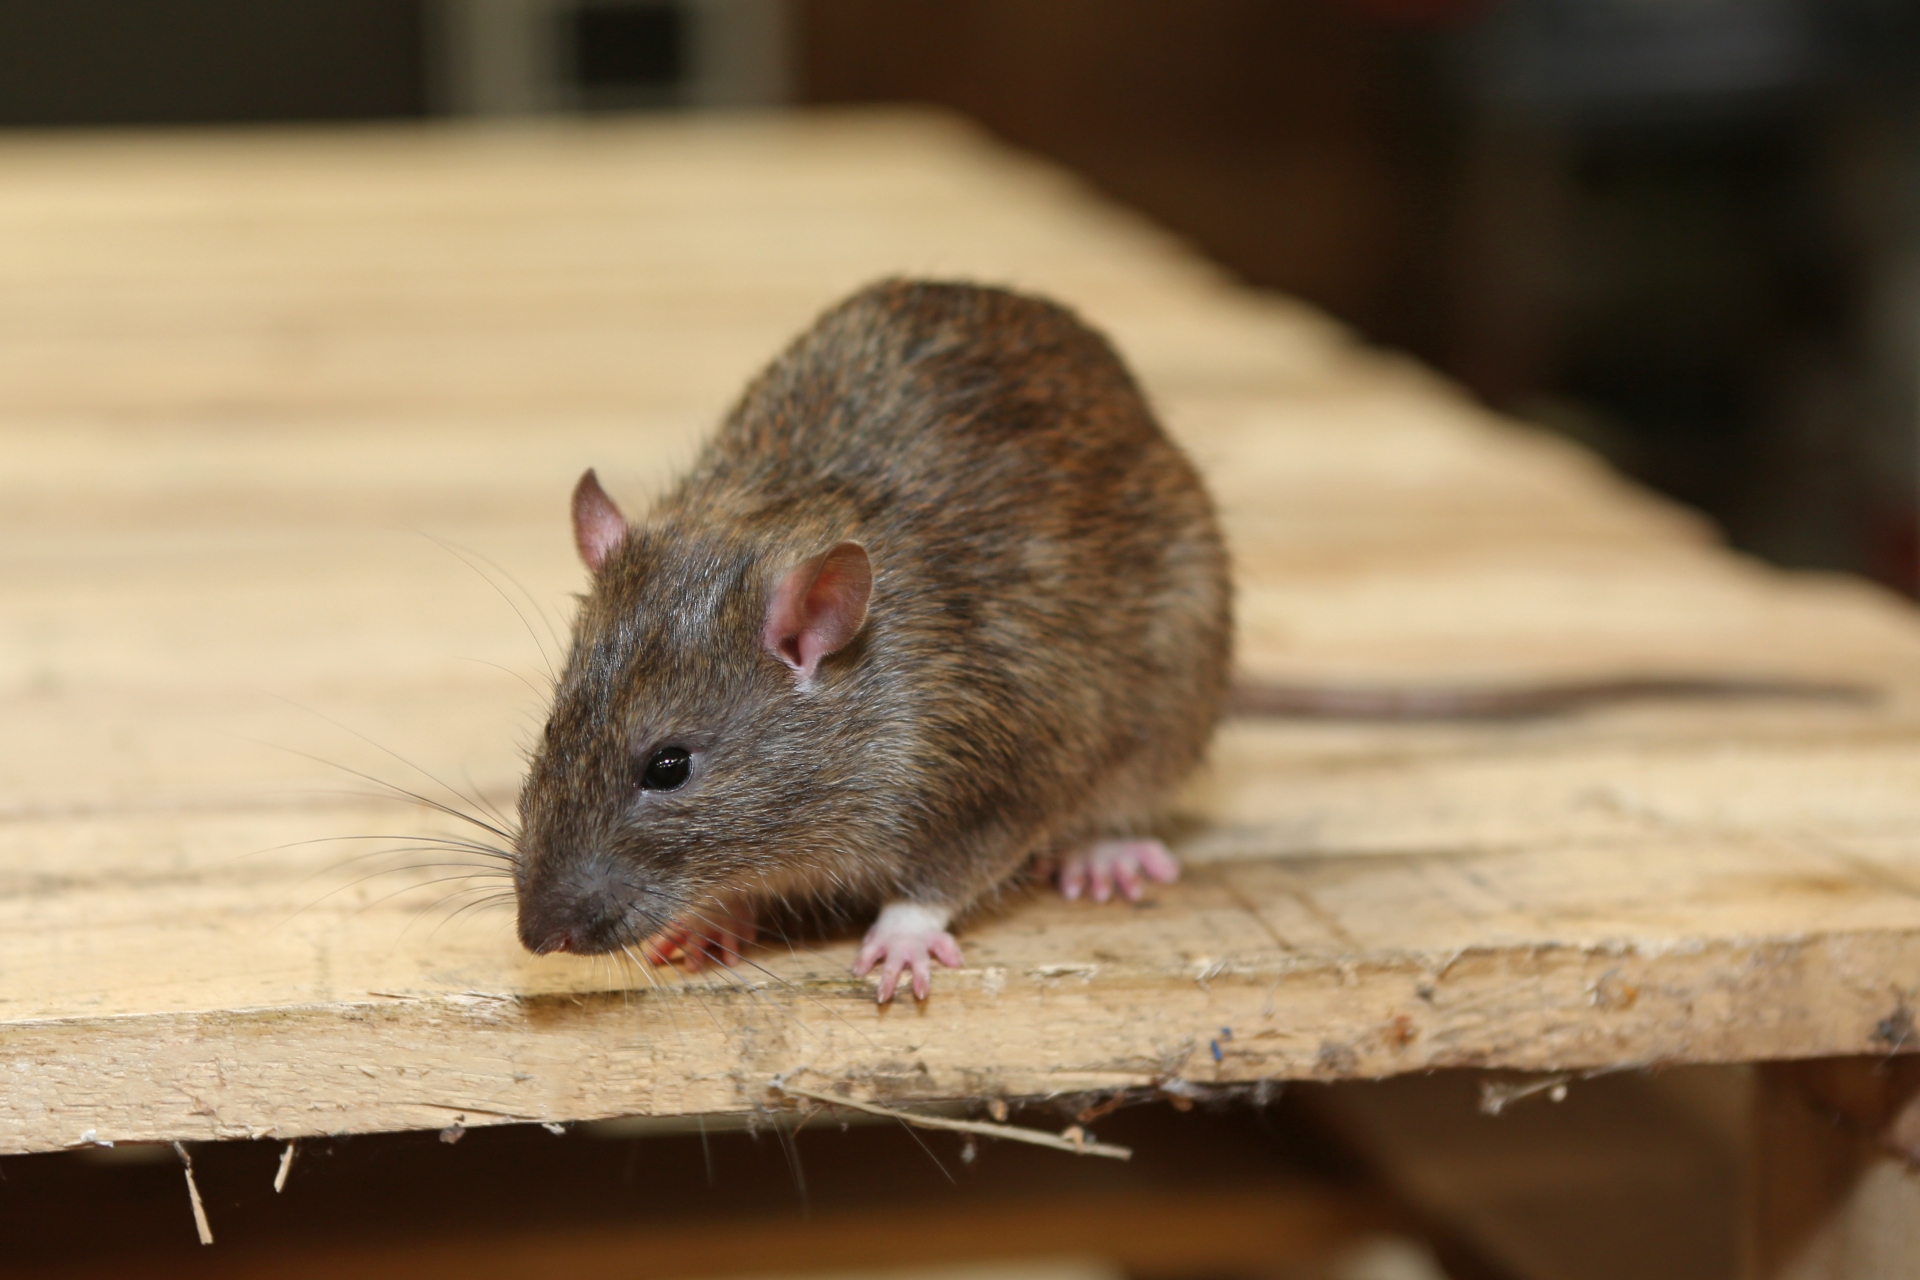 Rat Control, Pest Control in Enfield, EN1. Call Now 020 8166 9746